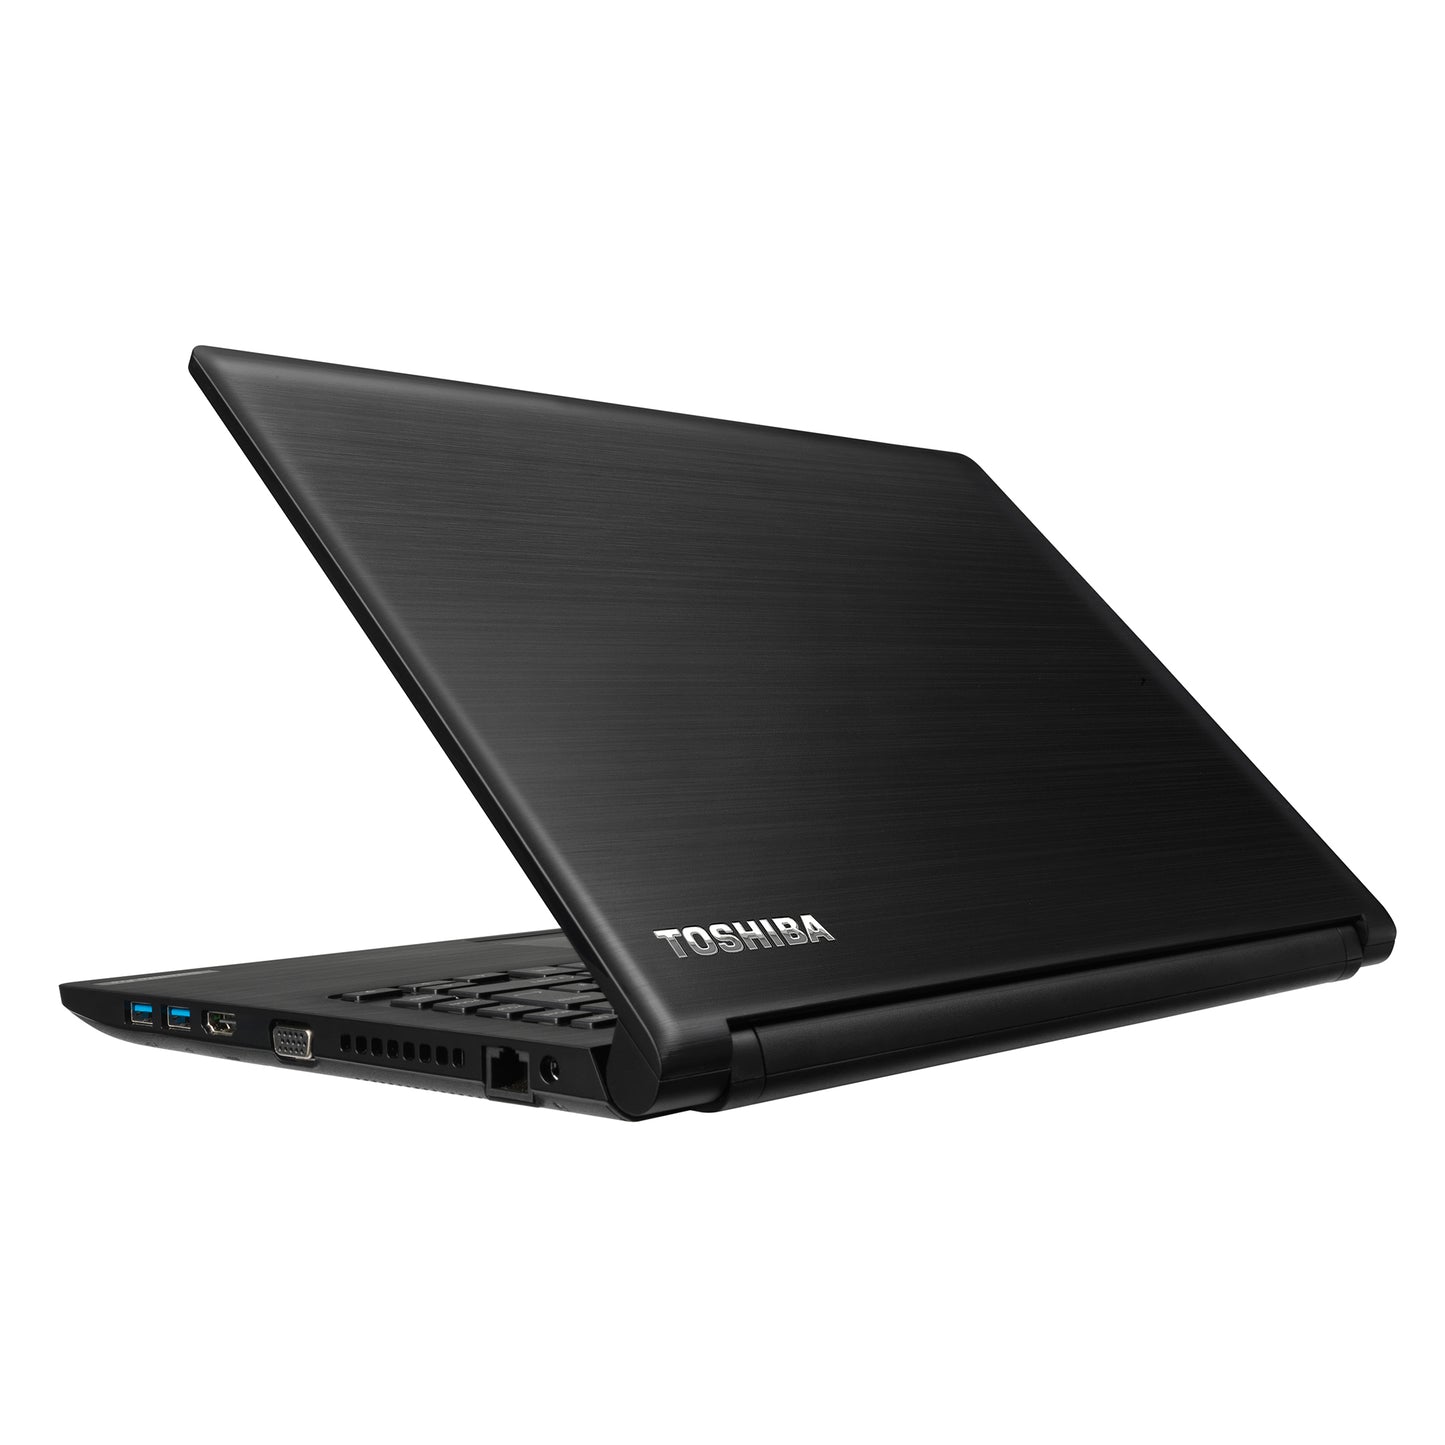 Toshiba Satellite Pro A40-C Core i3-6100u 14" Screen Laptop Offer (Used With Warranty)